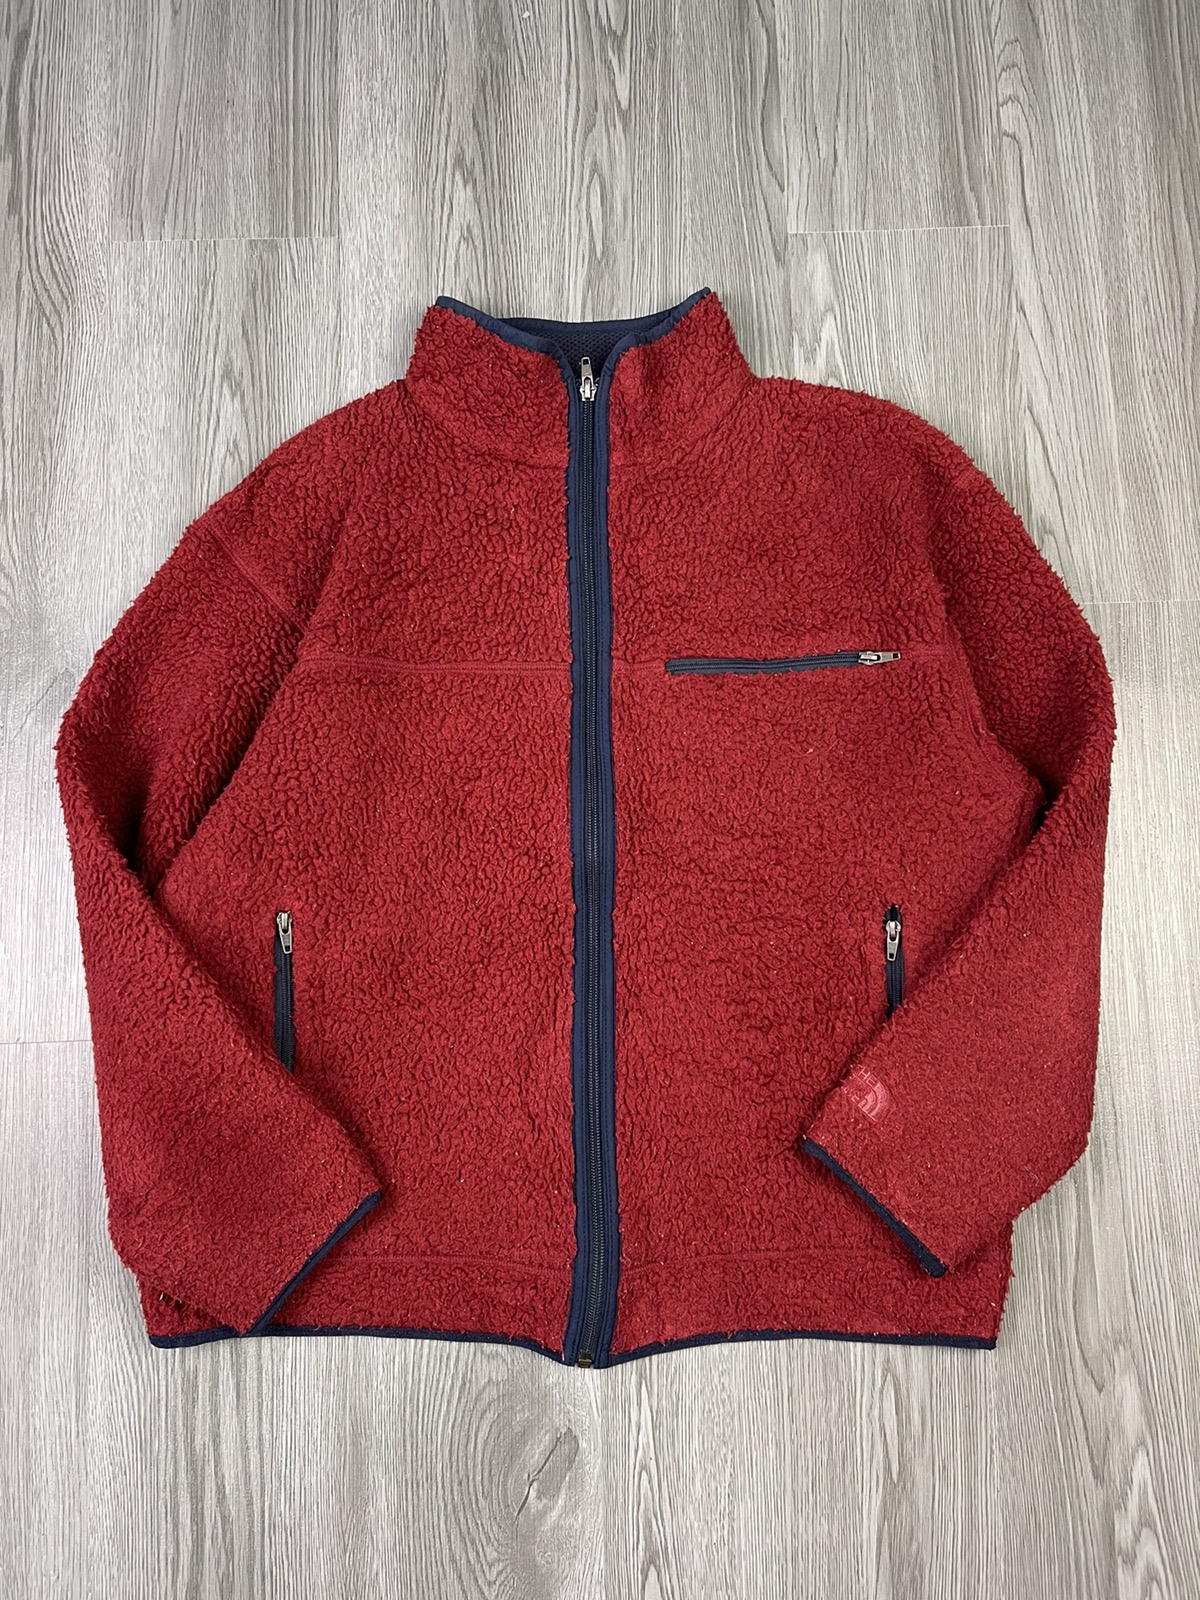 Red maroon The North Face fleece jacket - 2